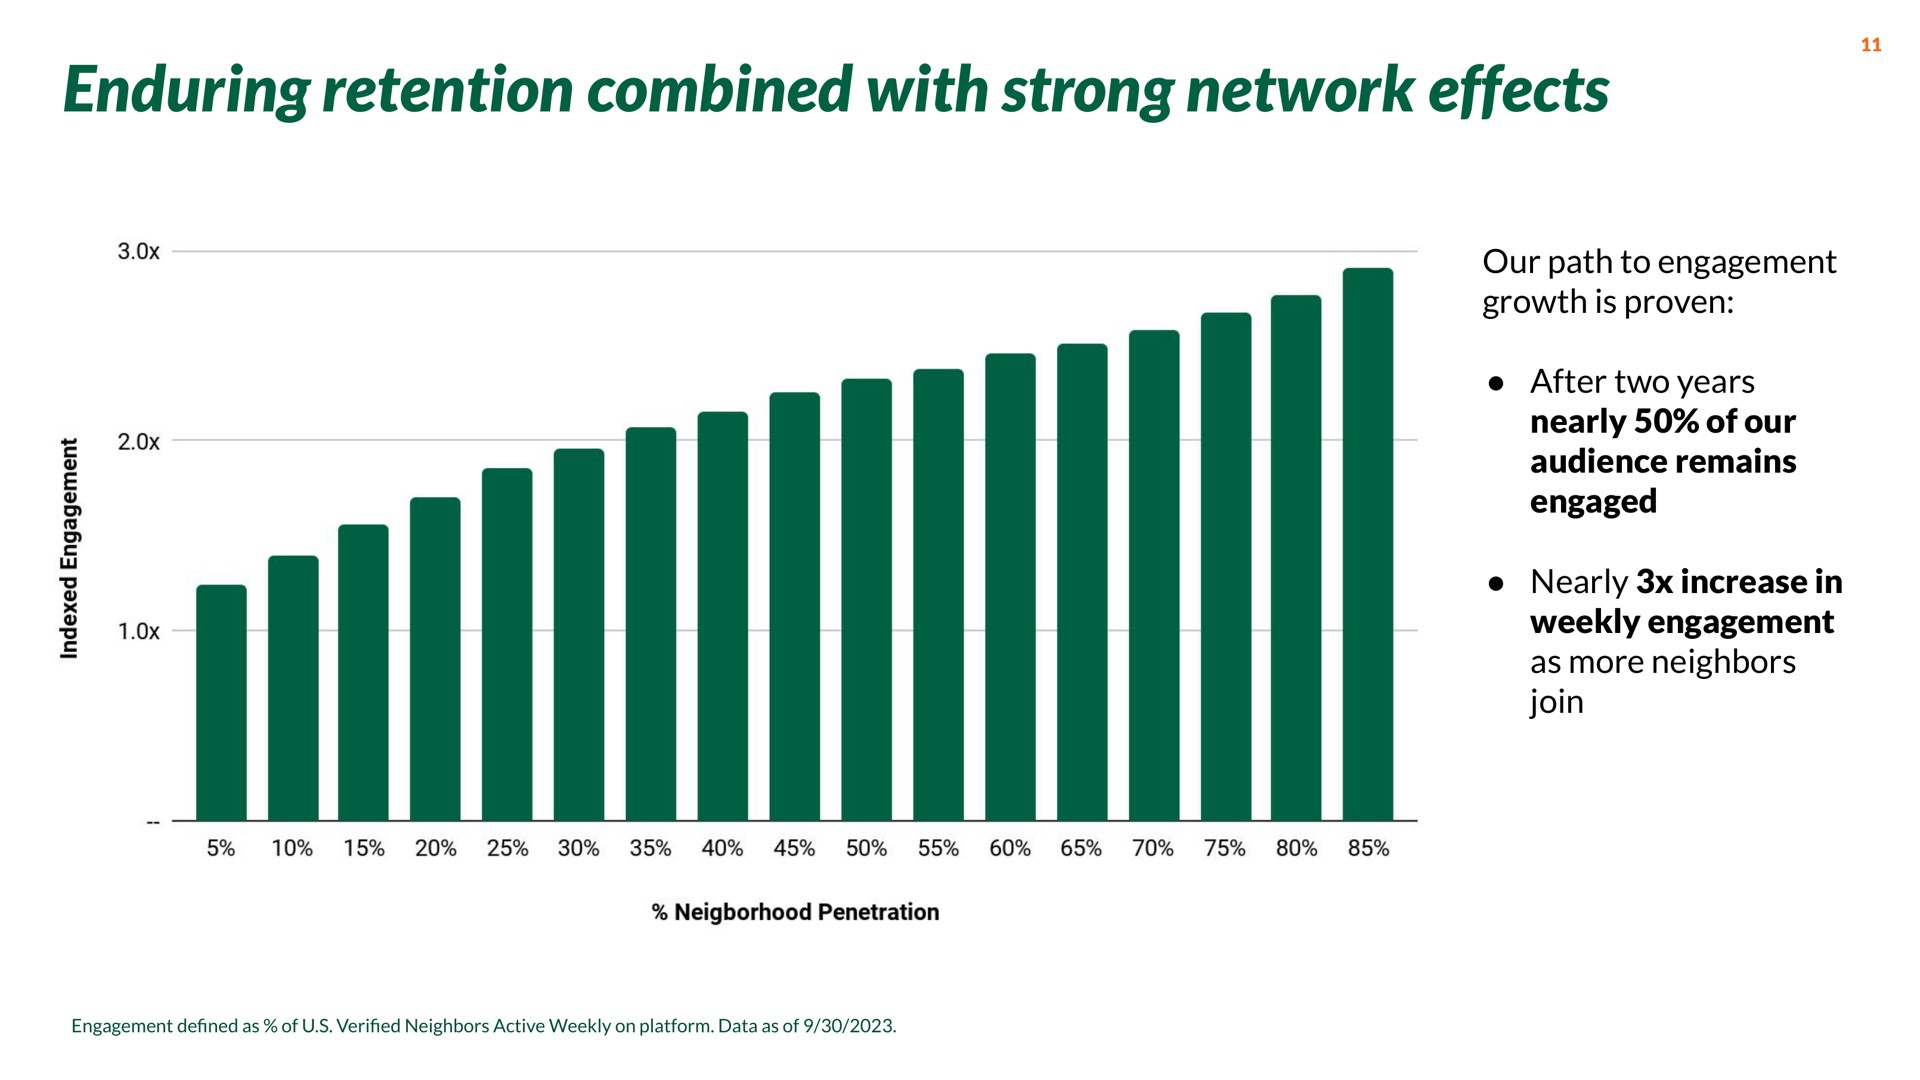 enduring retention combined with strong network effects our path to engagement growth is proven after two years nearly of our audience remains engaged nearly increase in weekly engagement as more neighbors join | Nextdoor